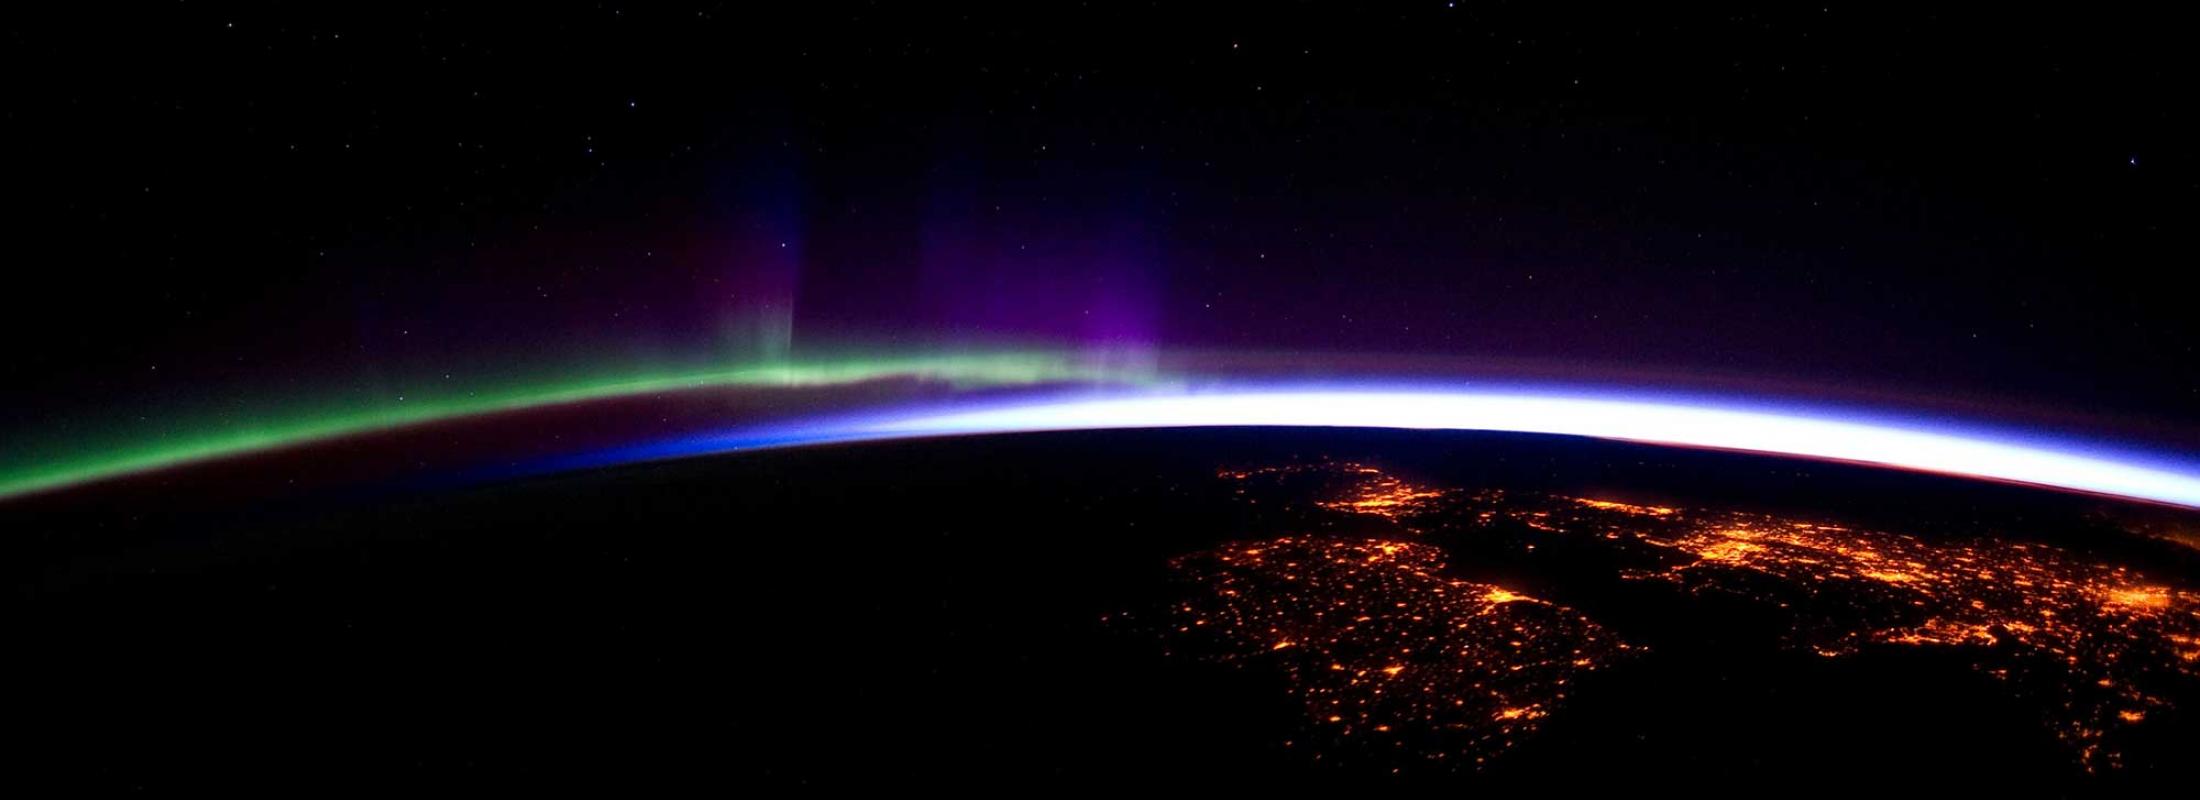 NOAA image of Earth's horizon from space you can see a green light on one side and a blue light on the other side of the horizon and some cities lit up from space on the Earth